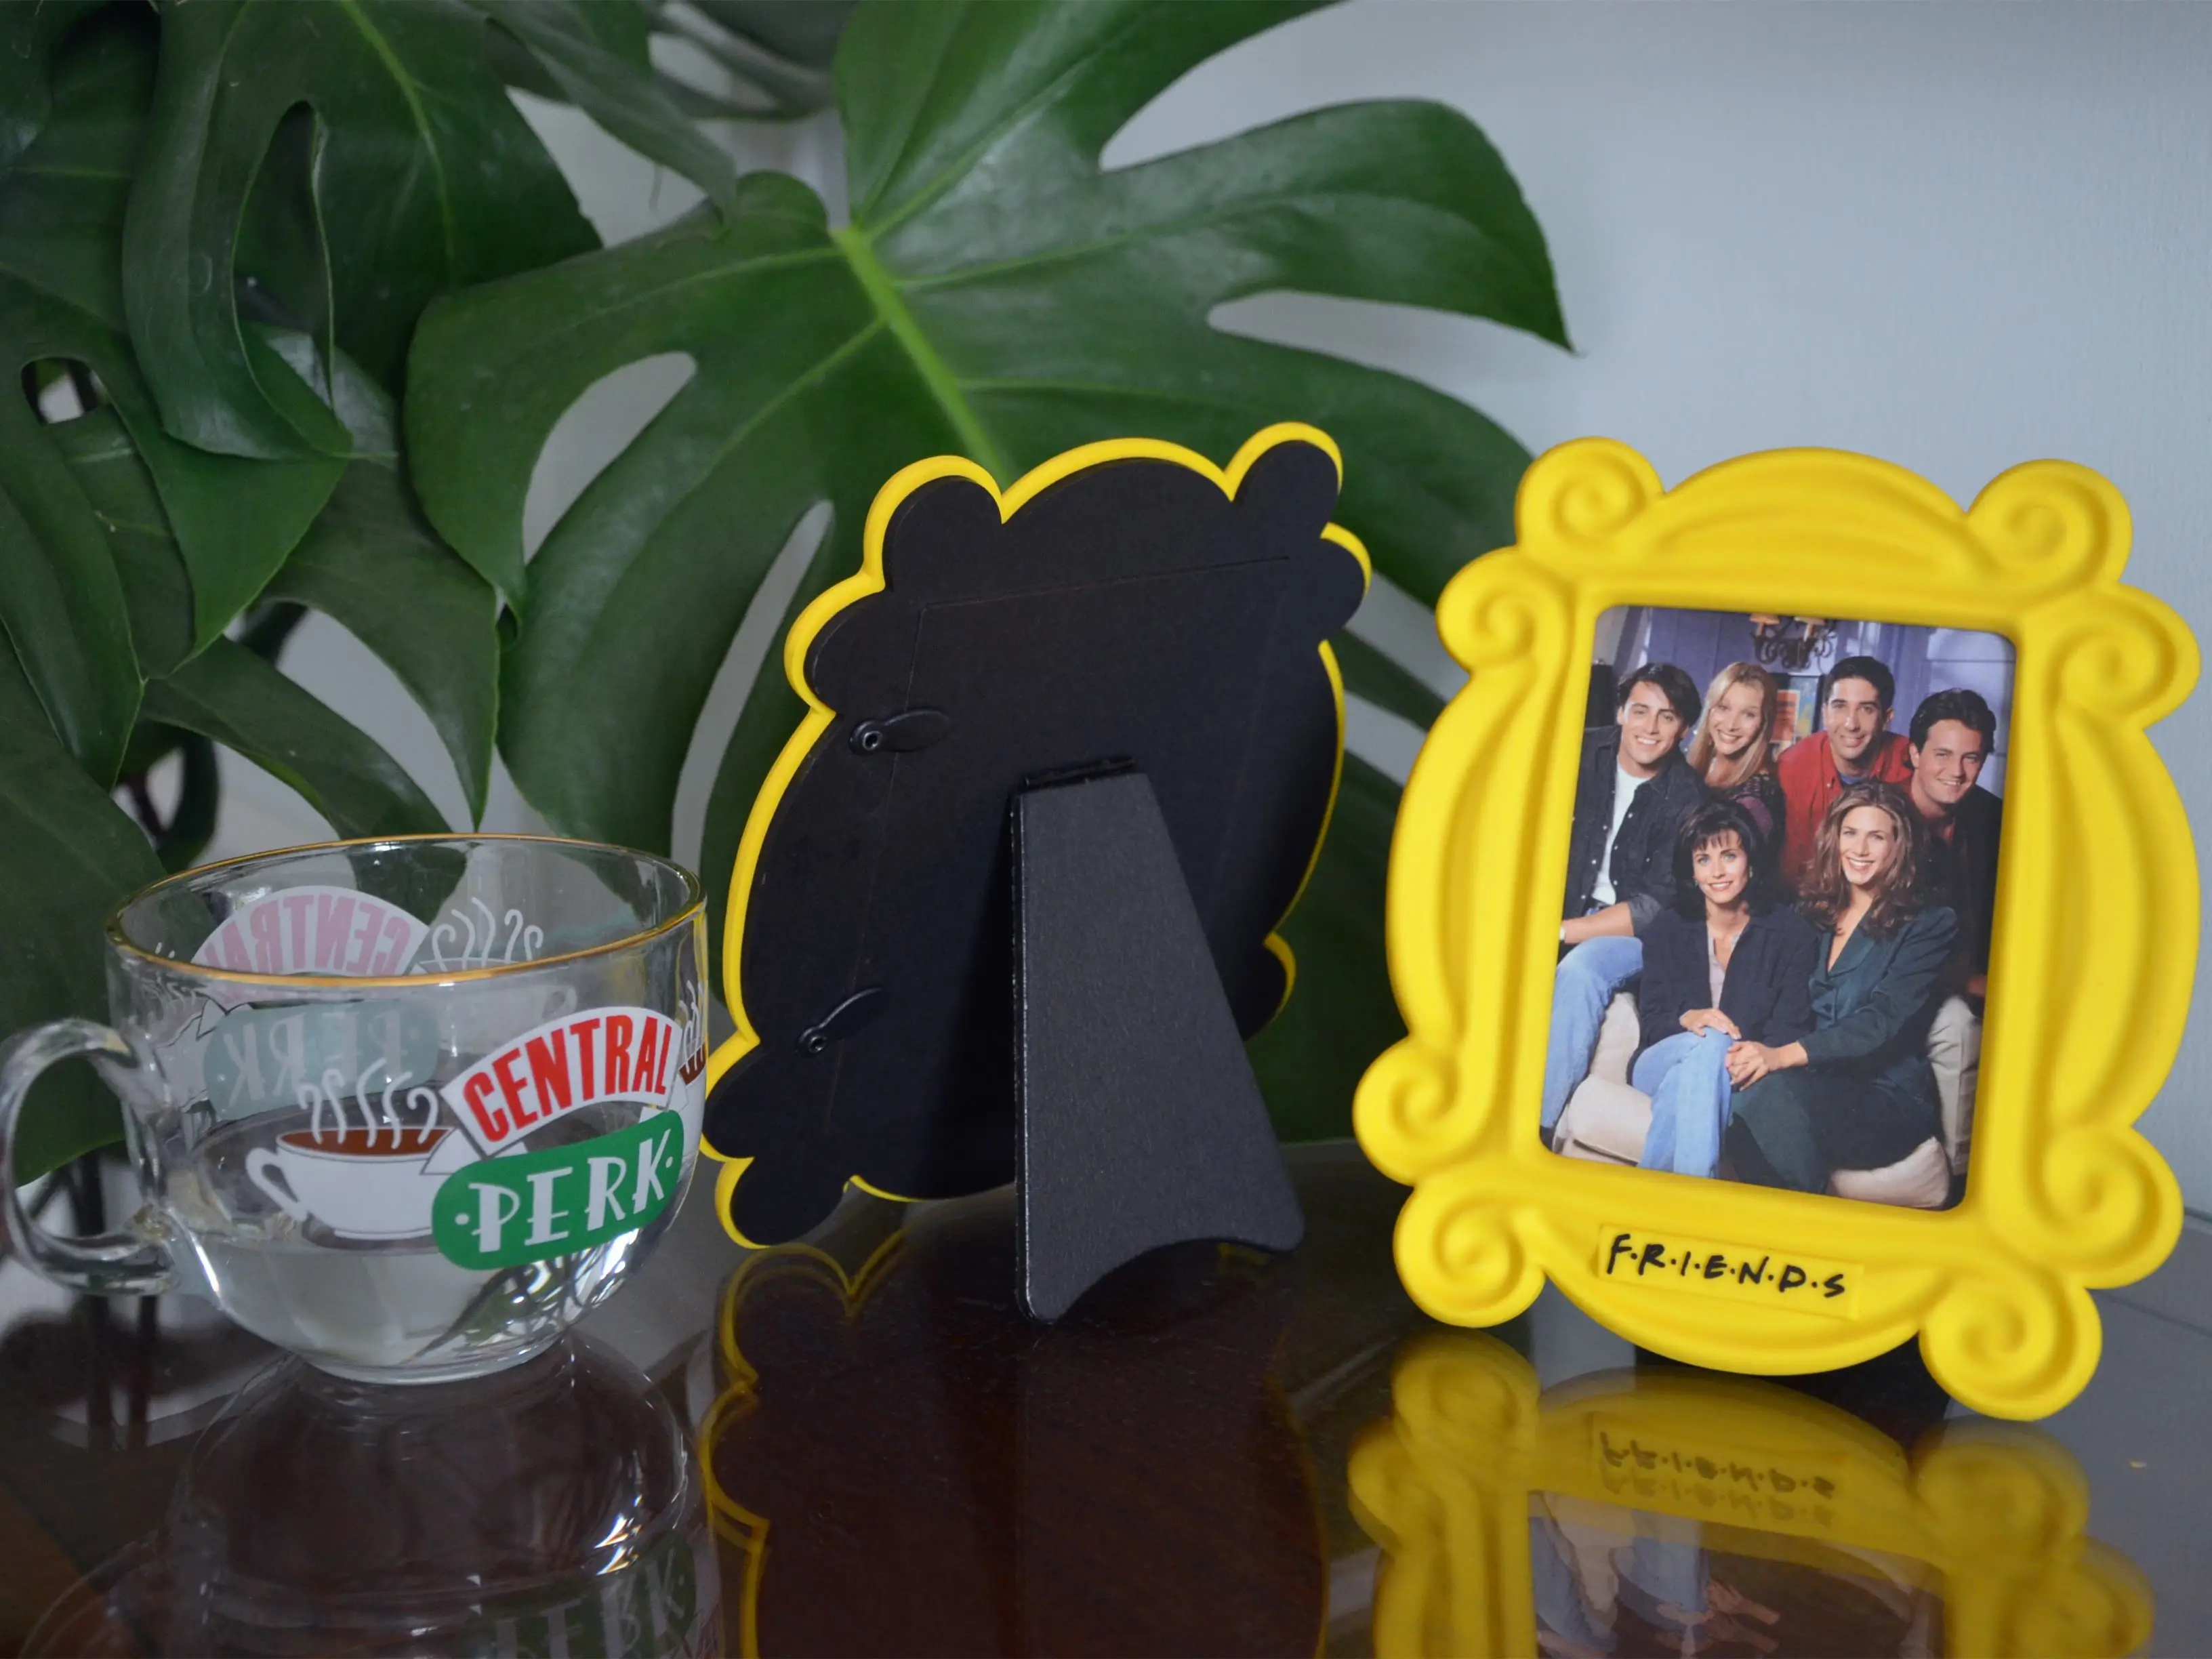 Friends TV Show Photo Frame Handmade Monica Door Frame Yellow Photo Frames Collectible Home Decor Desk Ornaments Friends Gifts images - 6